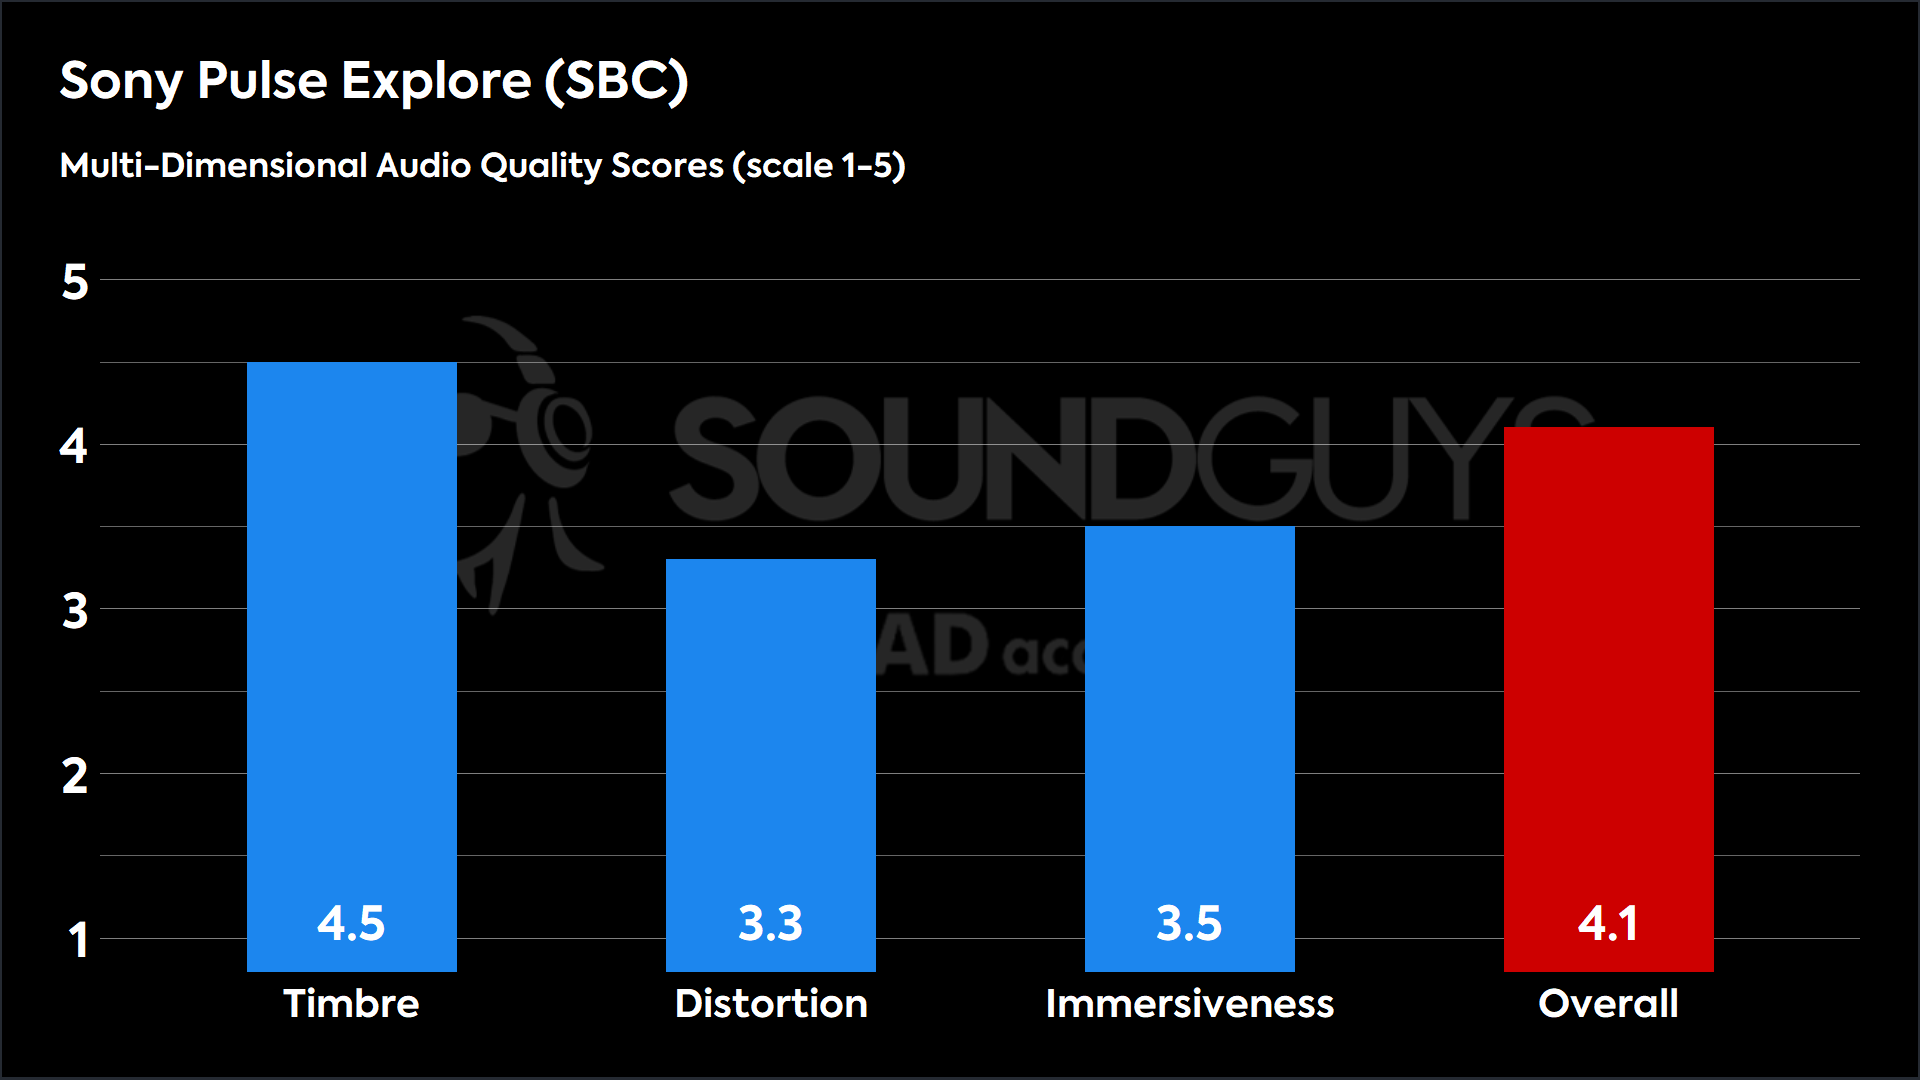 This chart shows the MDAQS results for the Sony Pulse Explore in SBC mode. The Timbre score is 4.5, The Distortion score is 3.3, the Immersiveness score is 3.5, and the Overall Score is 4.1.